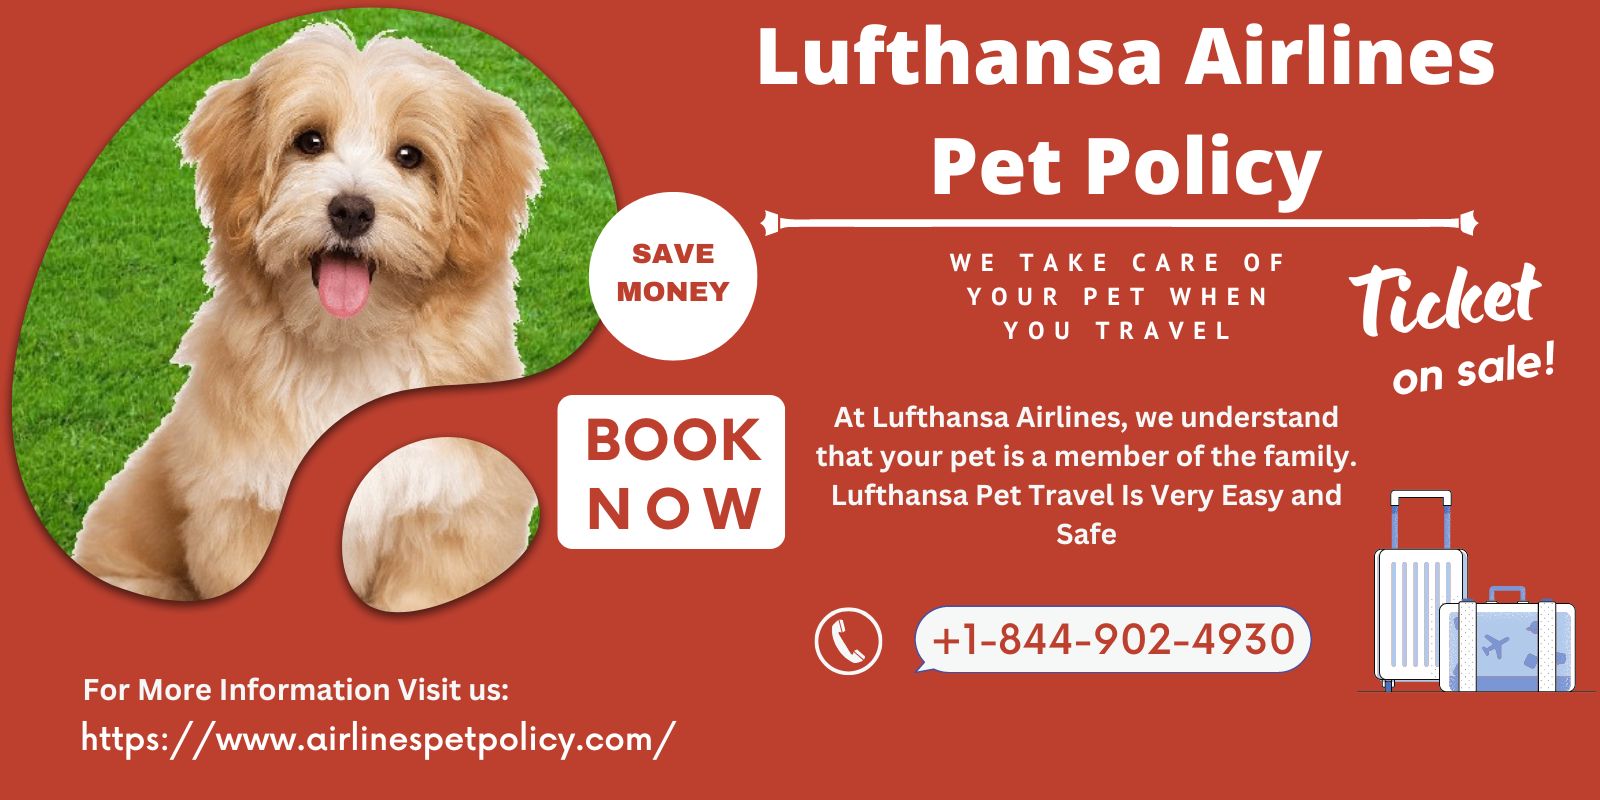 Dial +1-844-902-4930 For Lufthansa Airlines Pet Policy - We take care of your pet when you travel